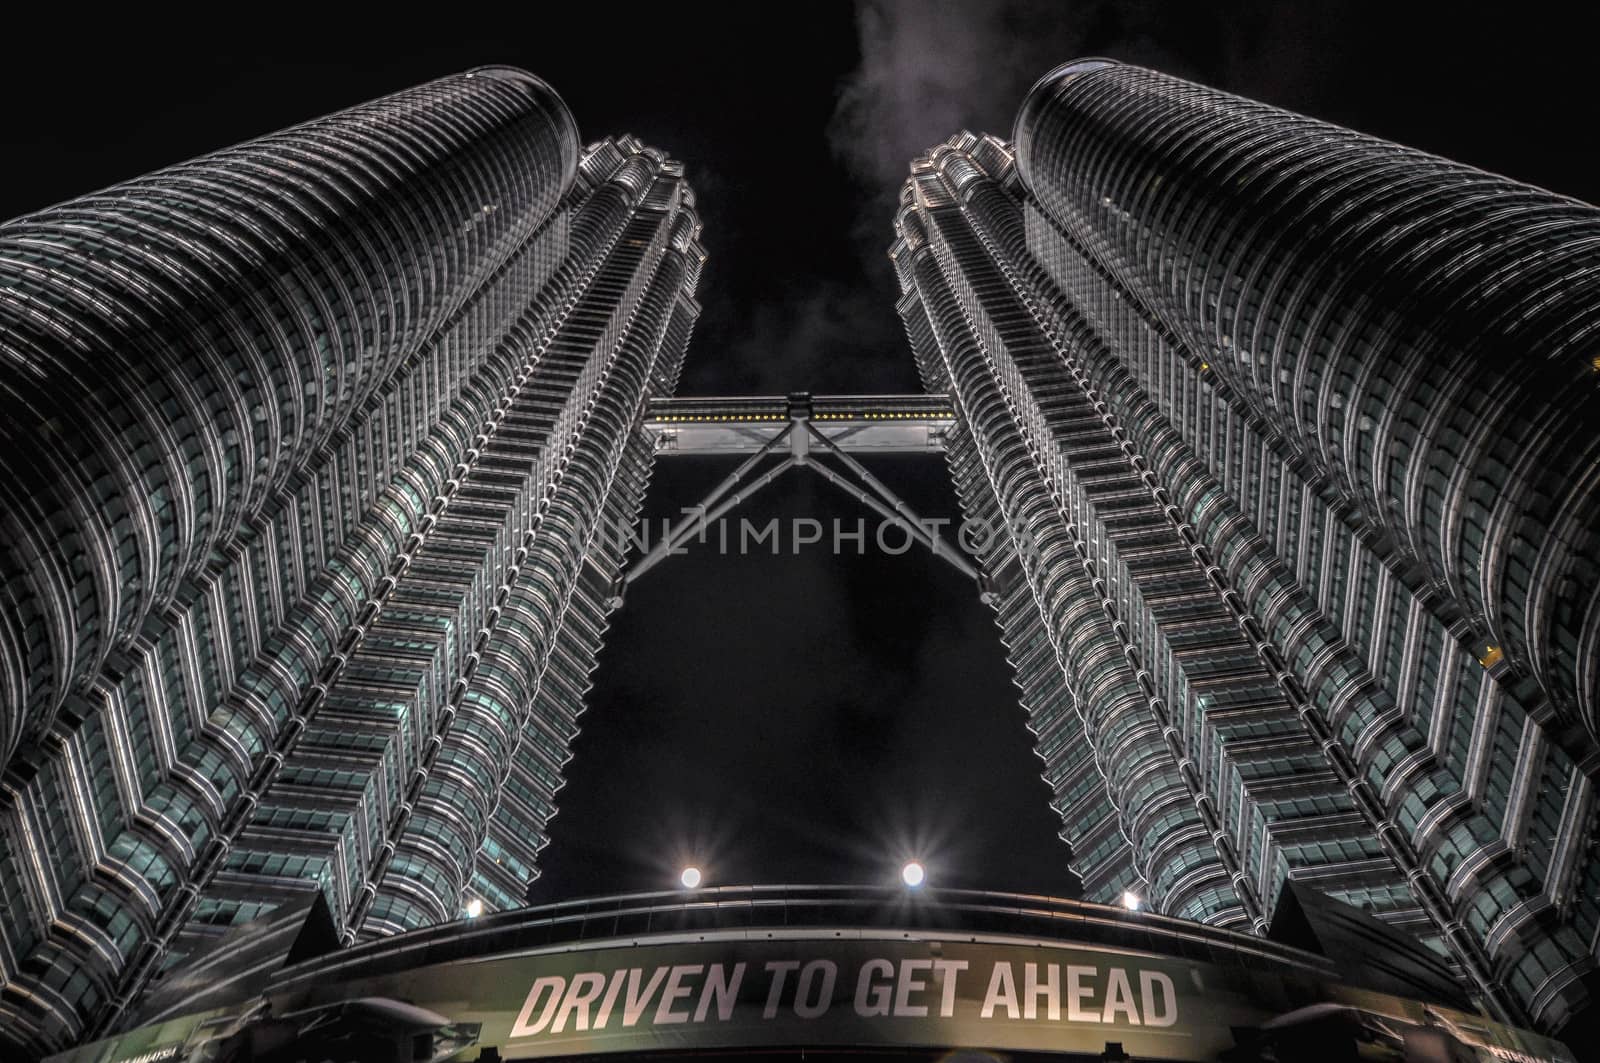 KUALA LUMPUR - APRIL 10: General view of Petronas Twin Towers  at night on Apr 10, 2011 in Kuala Lumpur, Malaysia. The towers are the worlds tallest twin towers with the height of 451.9m.